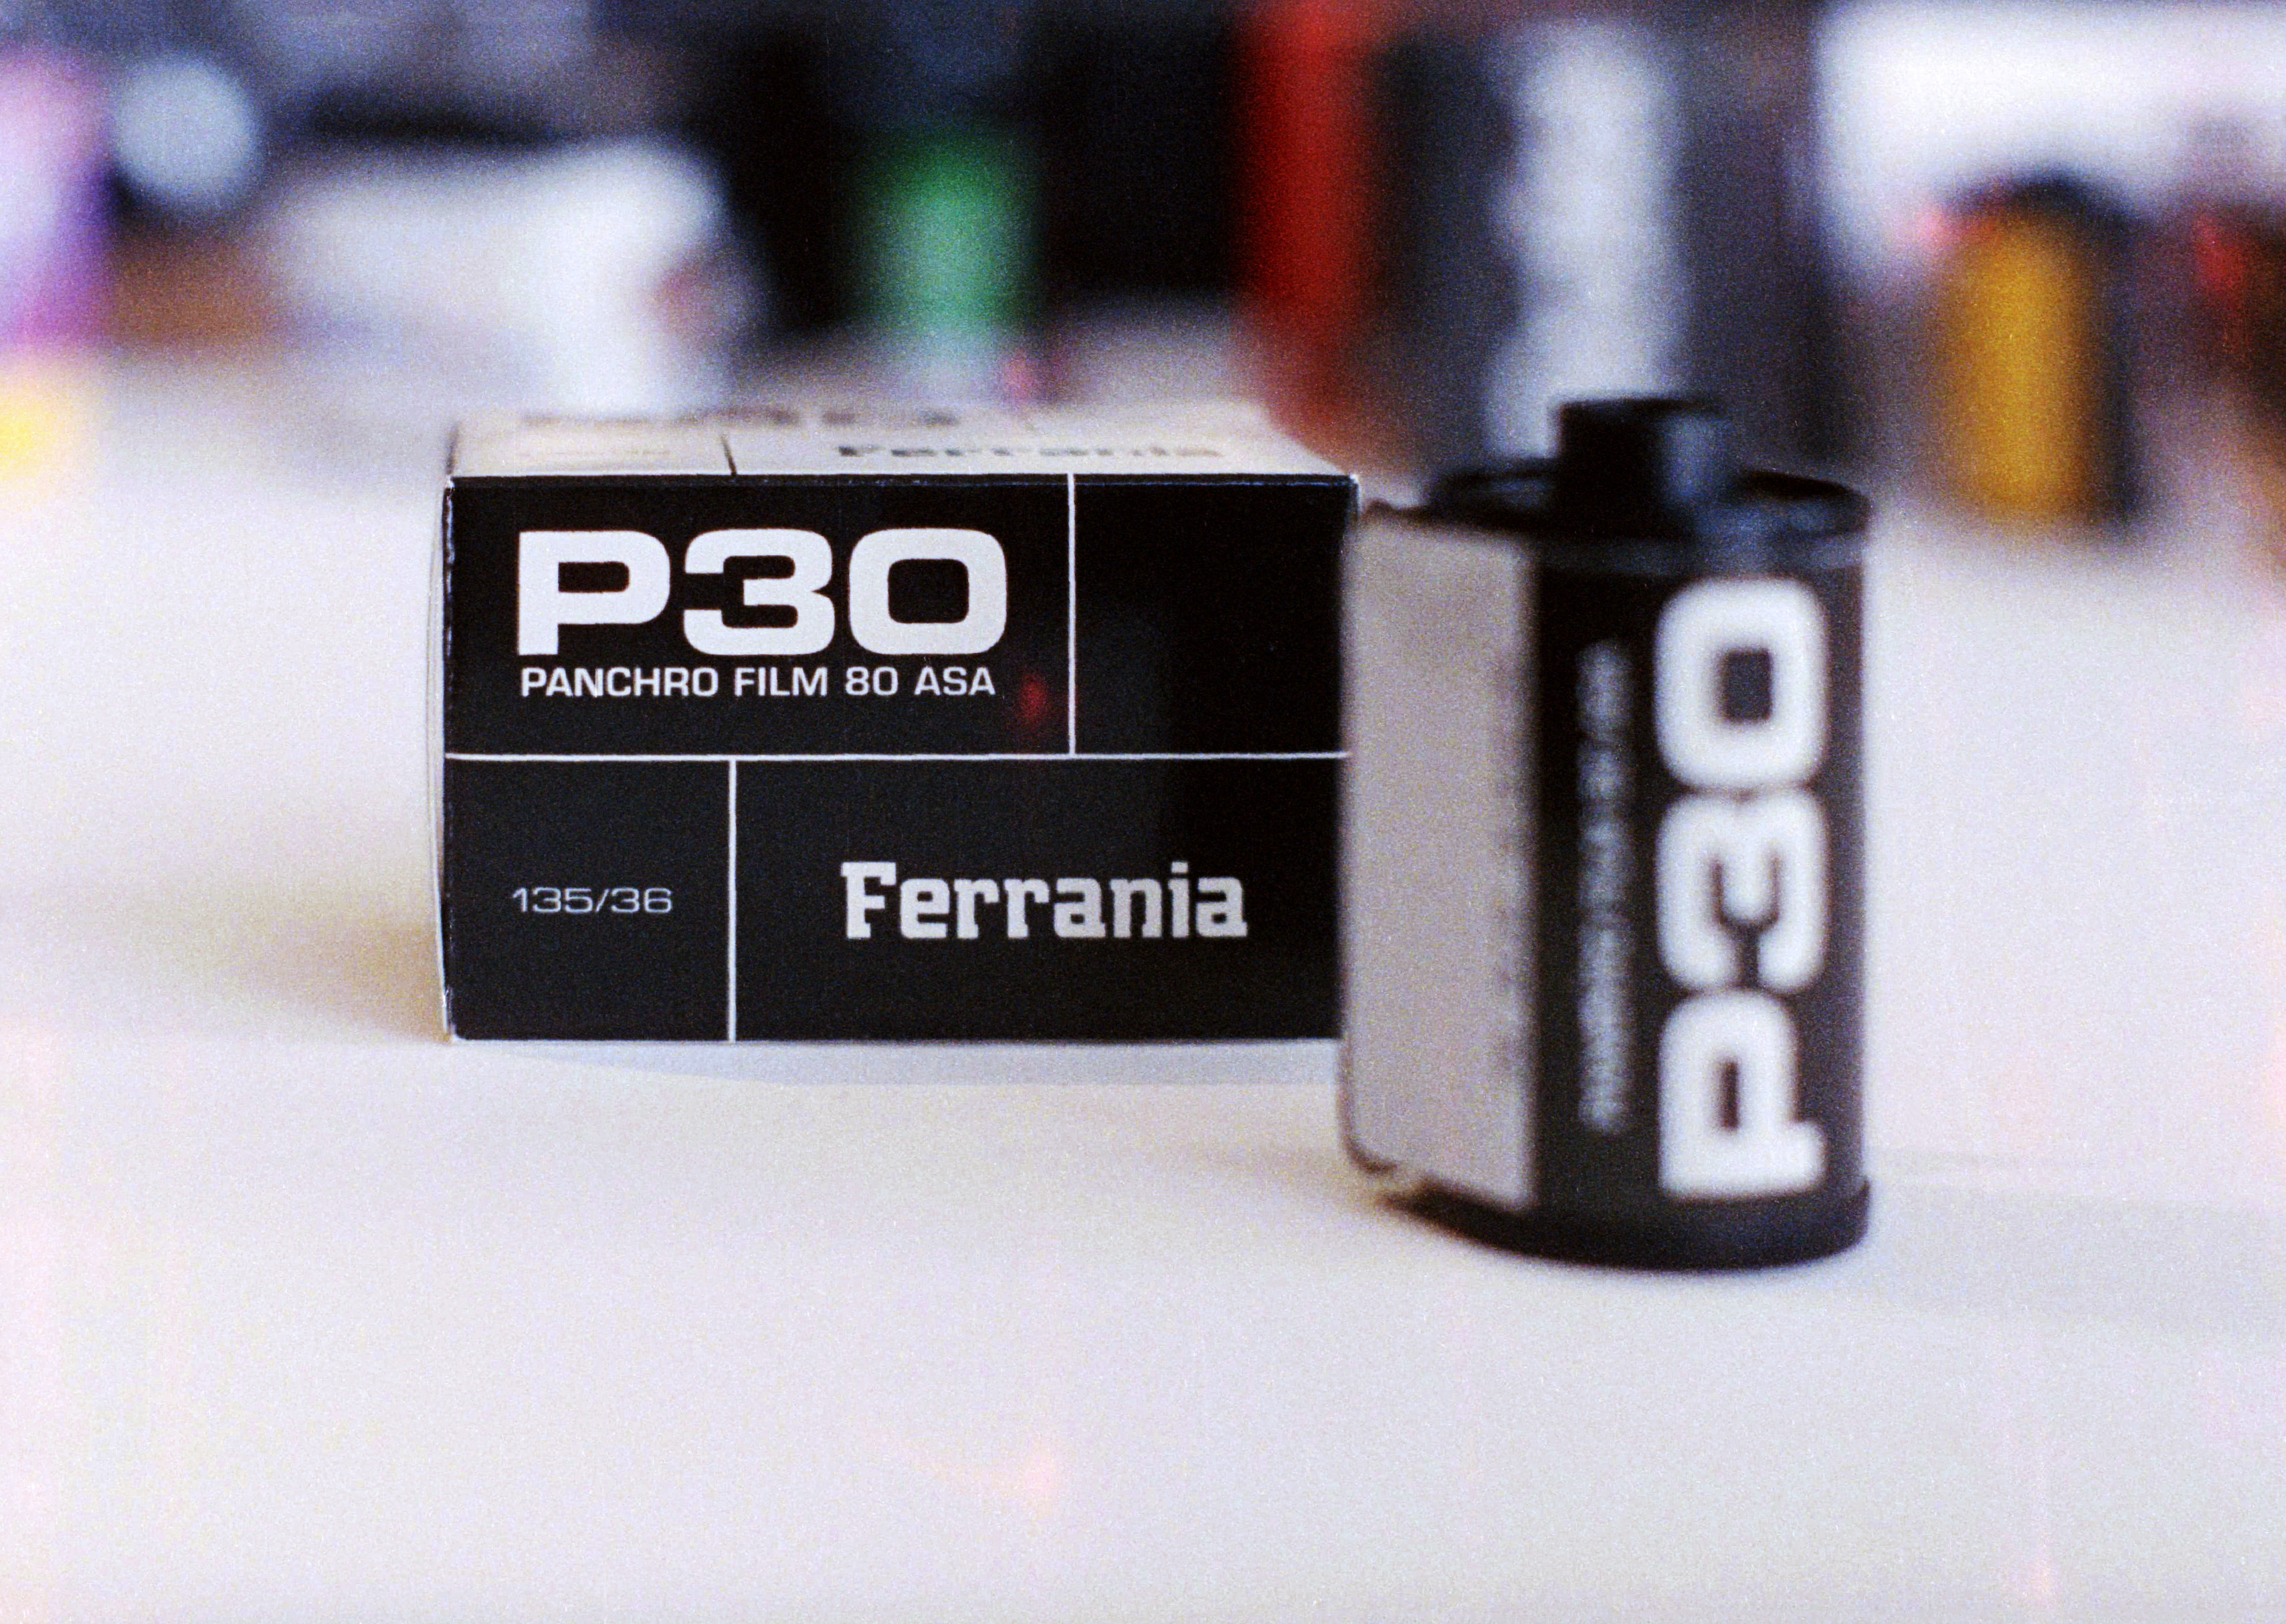 A box of Film Ferrania P30 film next to 35mm cartridge on a white table with some colourful out-of-focus background.